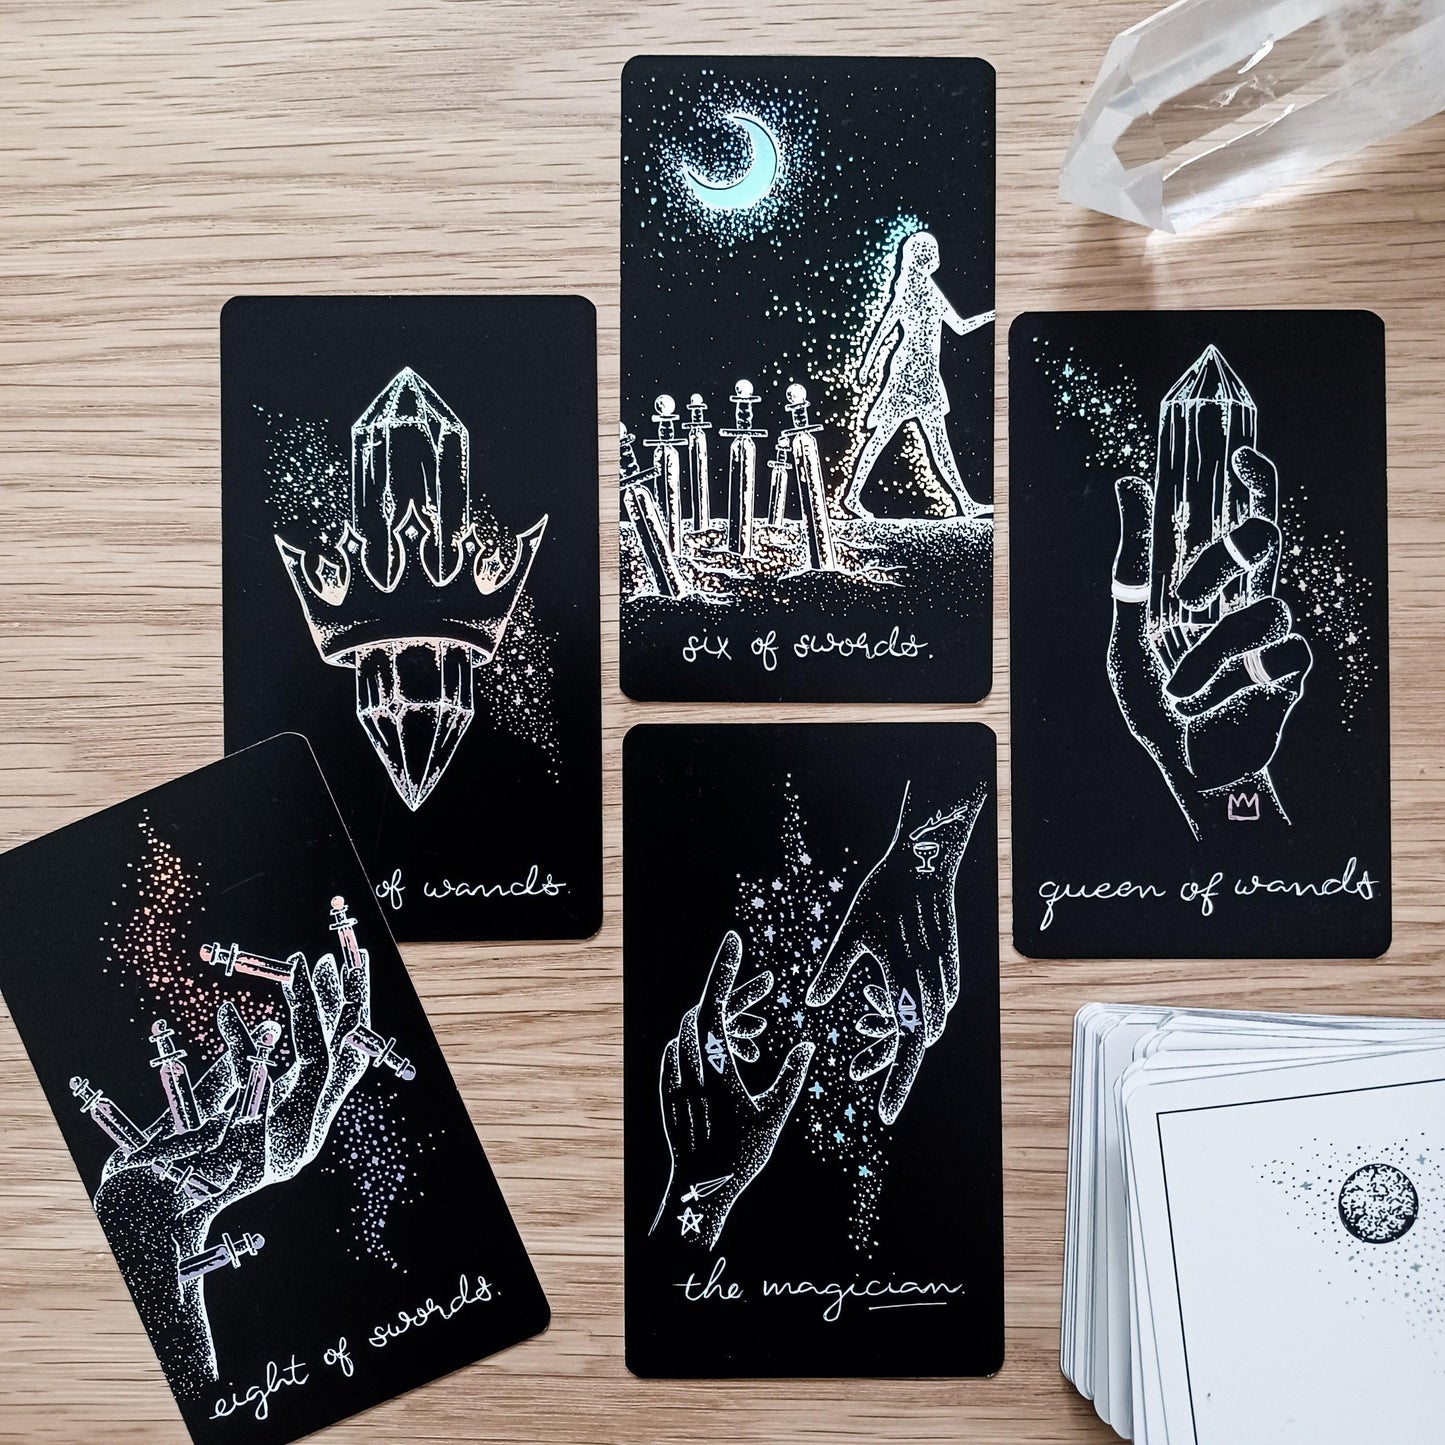 5 card spread, divining insight from tarot cards that are hand drawn & designed in Melbourne